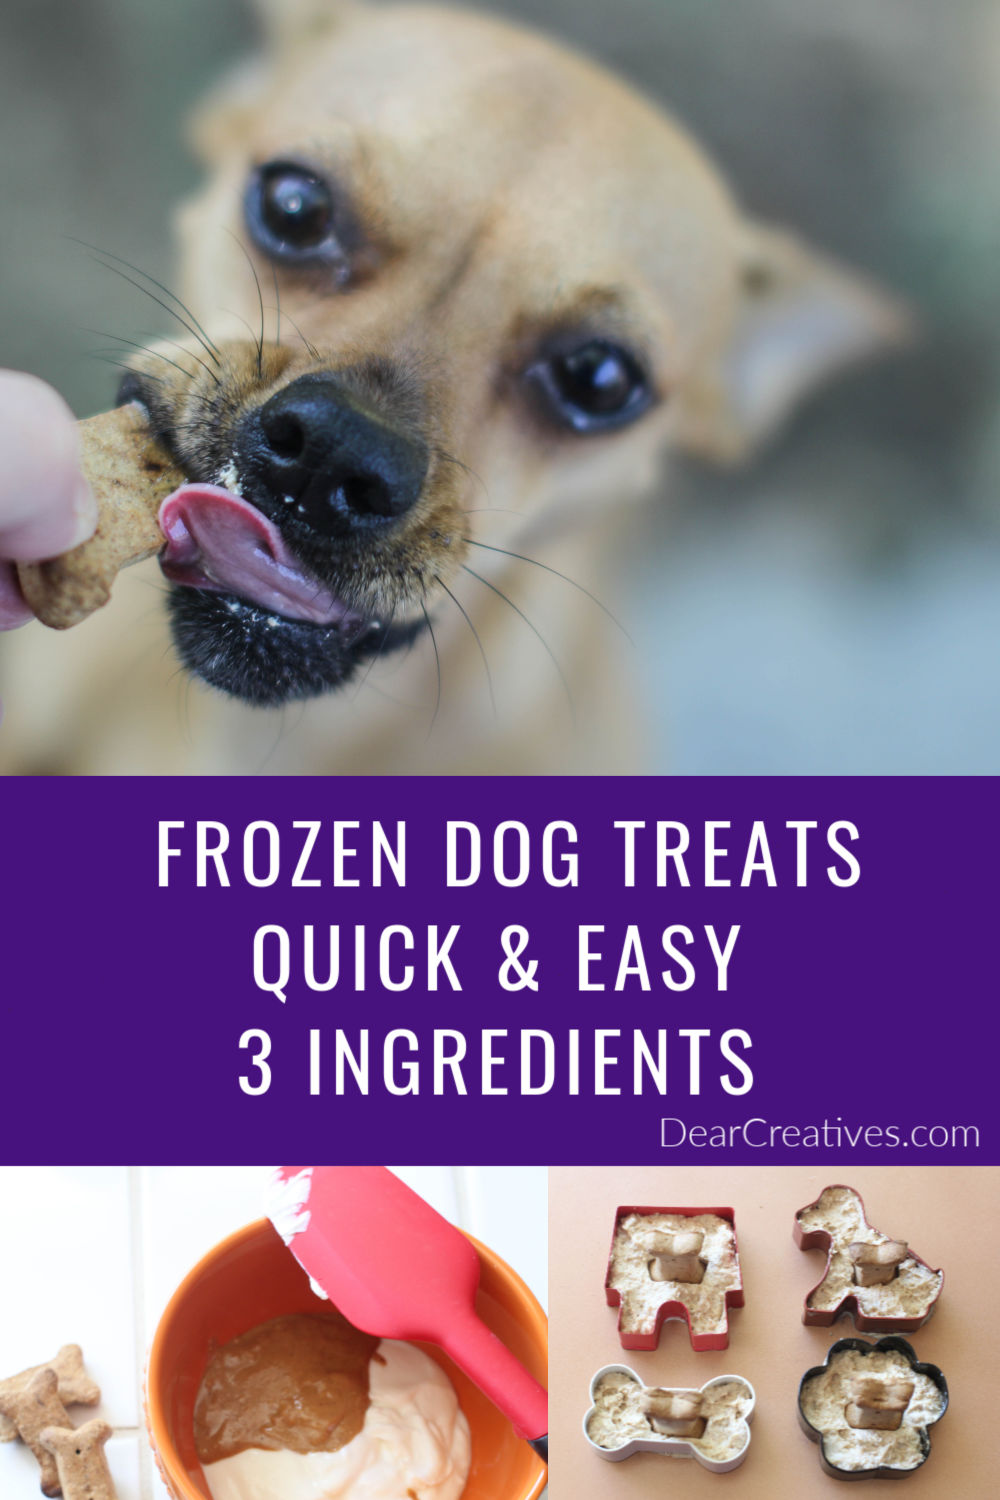 Frozen Dog Treats – Quick And Easy To Make!